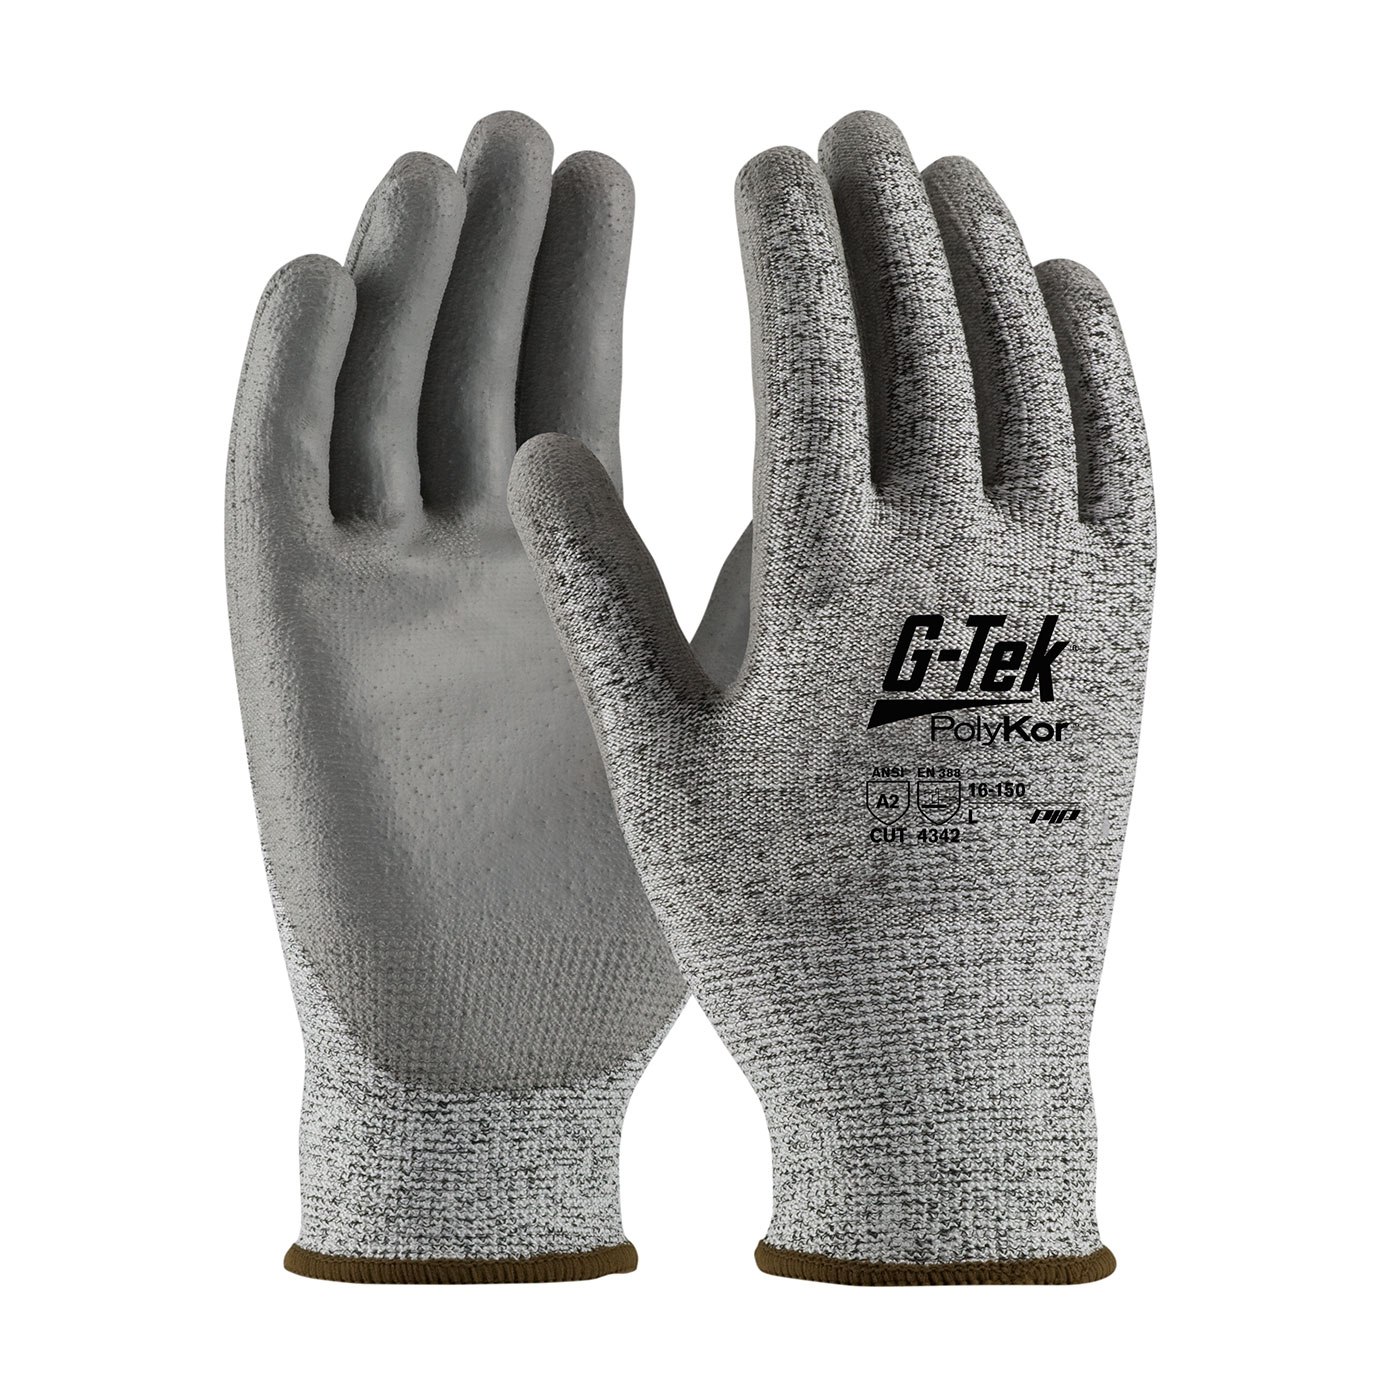 PIP 16-150/S G-Tek PolyKor Seamless Knit PolyKor Blended Glove with Polyurethane Coated Smooth Grip on Palm & Fingers - X-Large PID-16 150 S